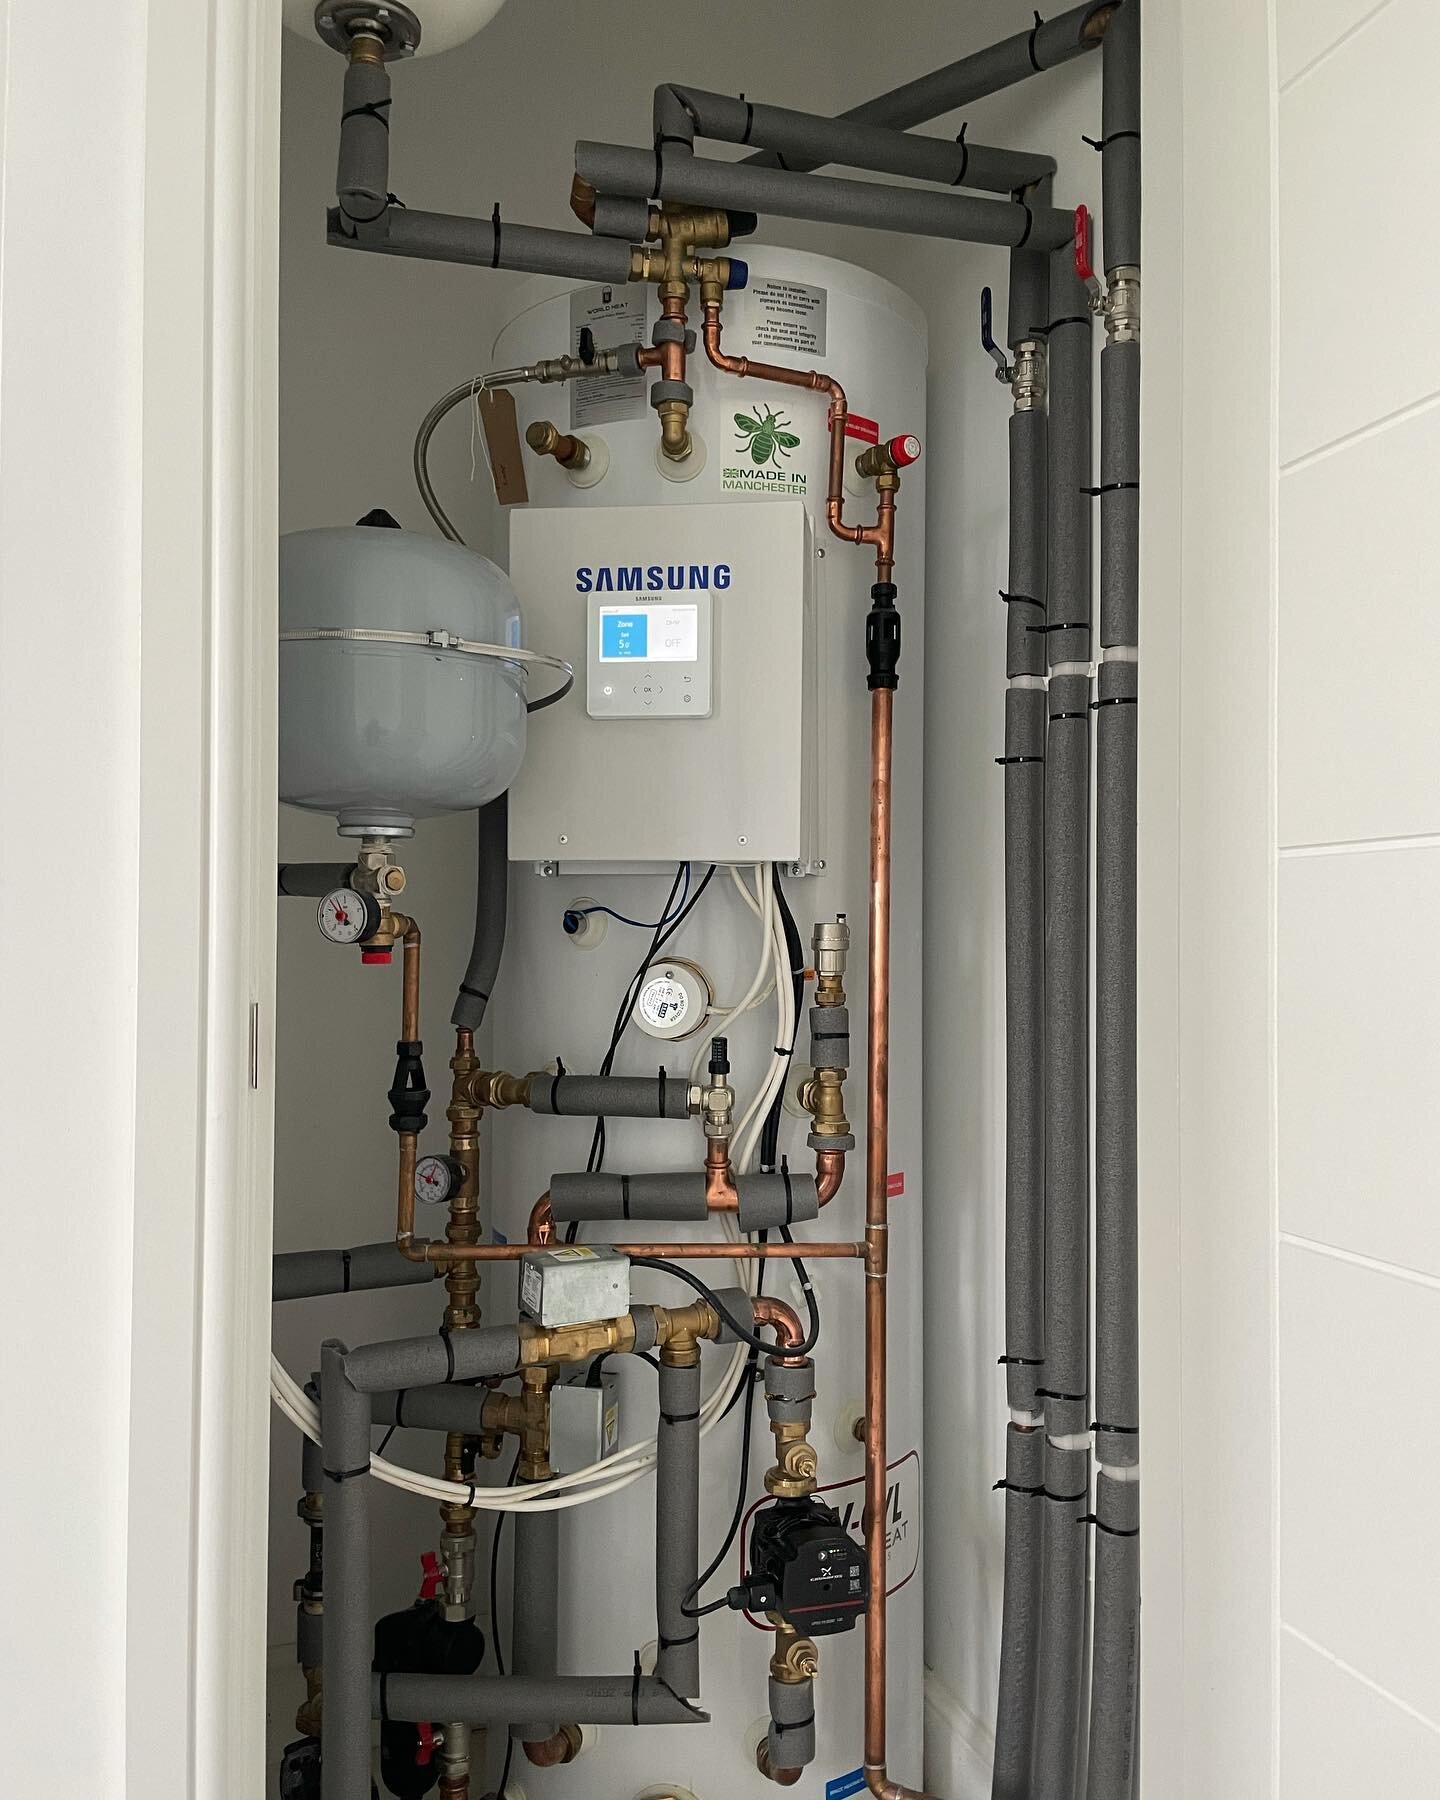 Some tidy pipework on display by the Legion Plumbing team installing 20  @worldheatuk Samsung Air Source Heat  Pump Hot Water Cylinders on site in Leamington Spa

#airsourceheatpumps #airsource #heating #hotwater #plumbing #plumbproud @plumber.88 @pl